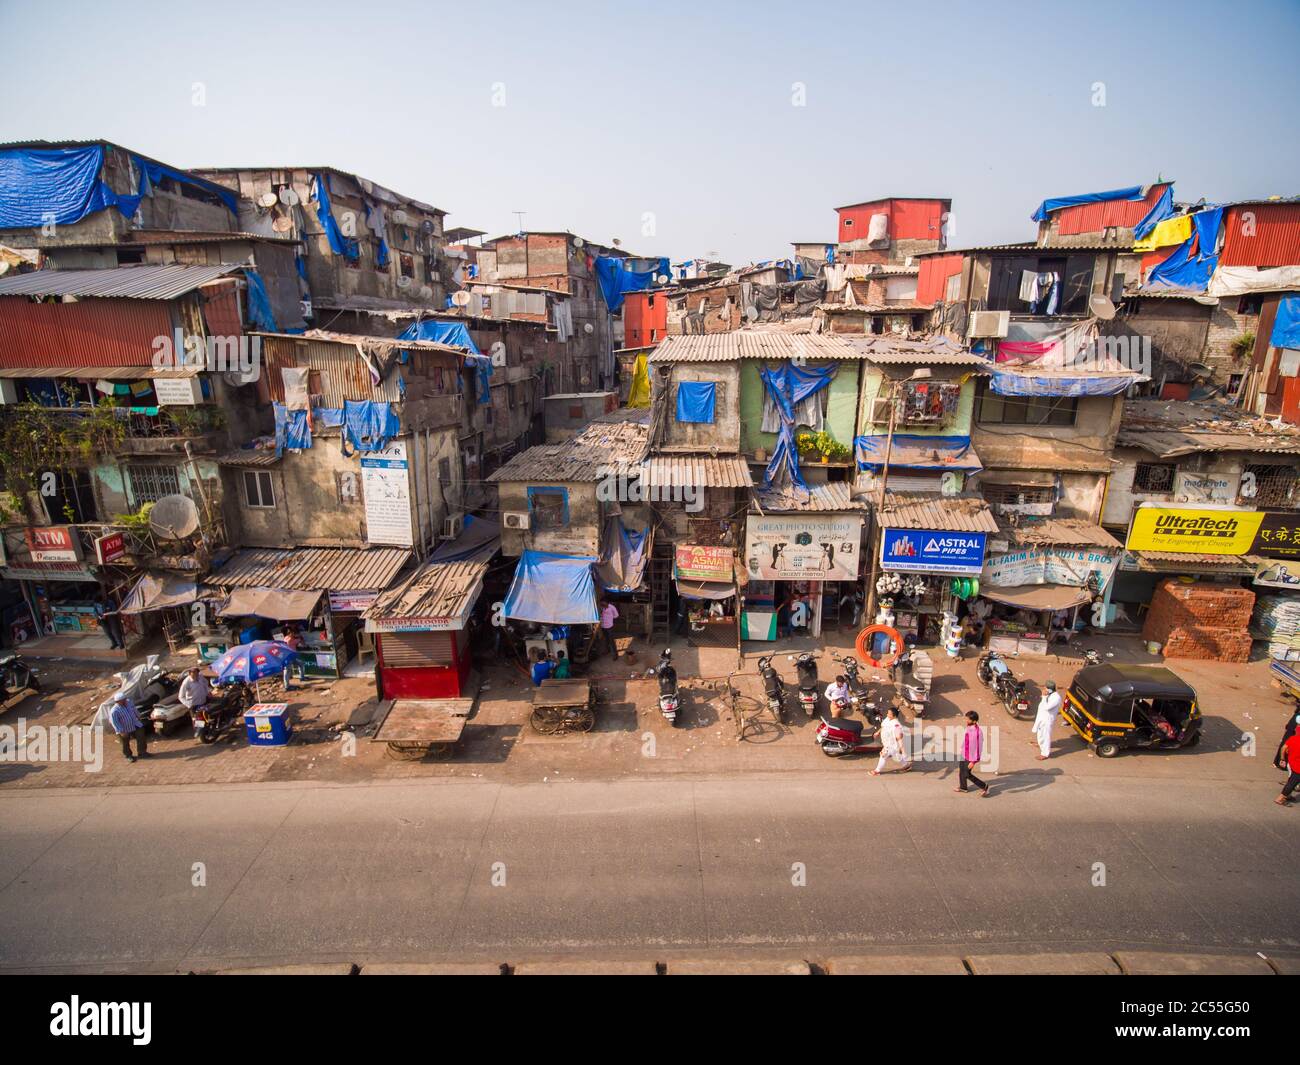 Mumbai, India - December 17, 2018: Poor and impoverished slums of Dharavi in the city of Mumbai. Stock Photo